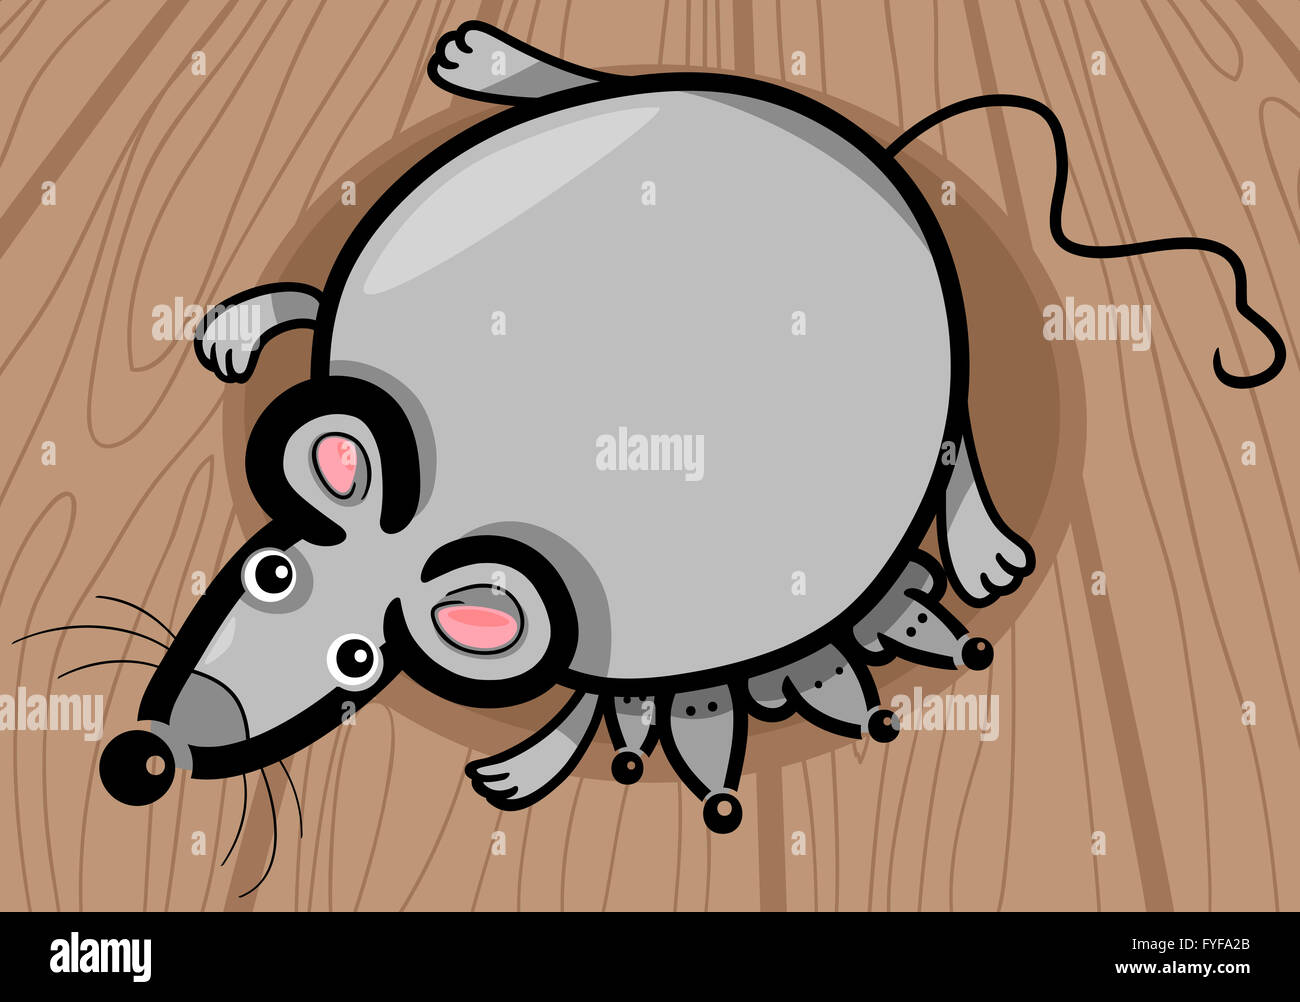 Baby Mouse And Mother High Resolution Stock Photography And Images Alamy